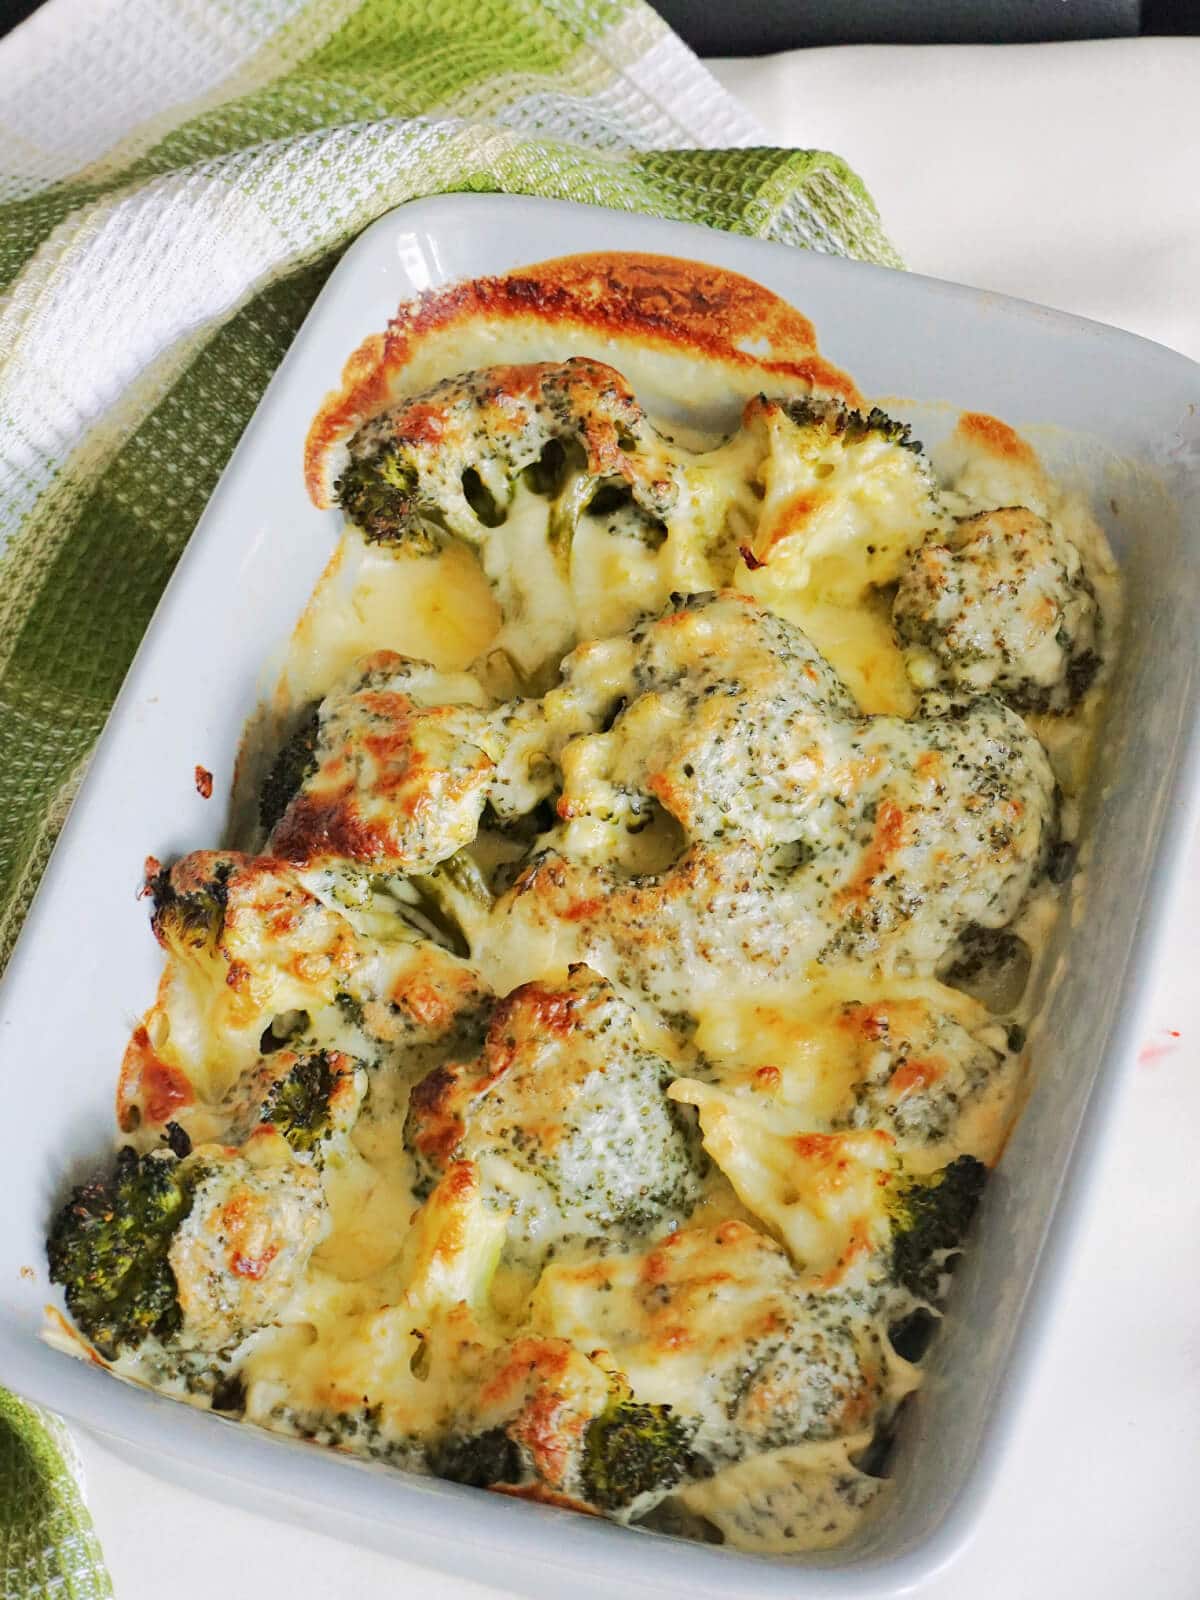 A dish with baked broccoli cheese